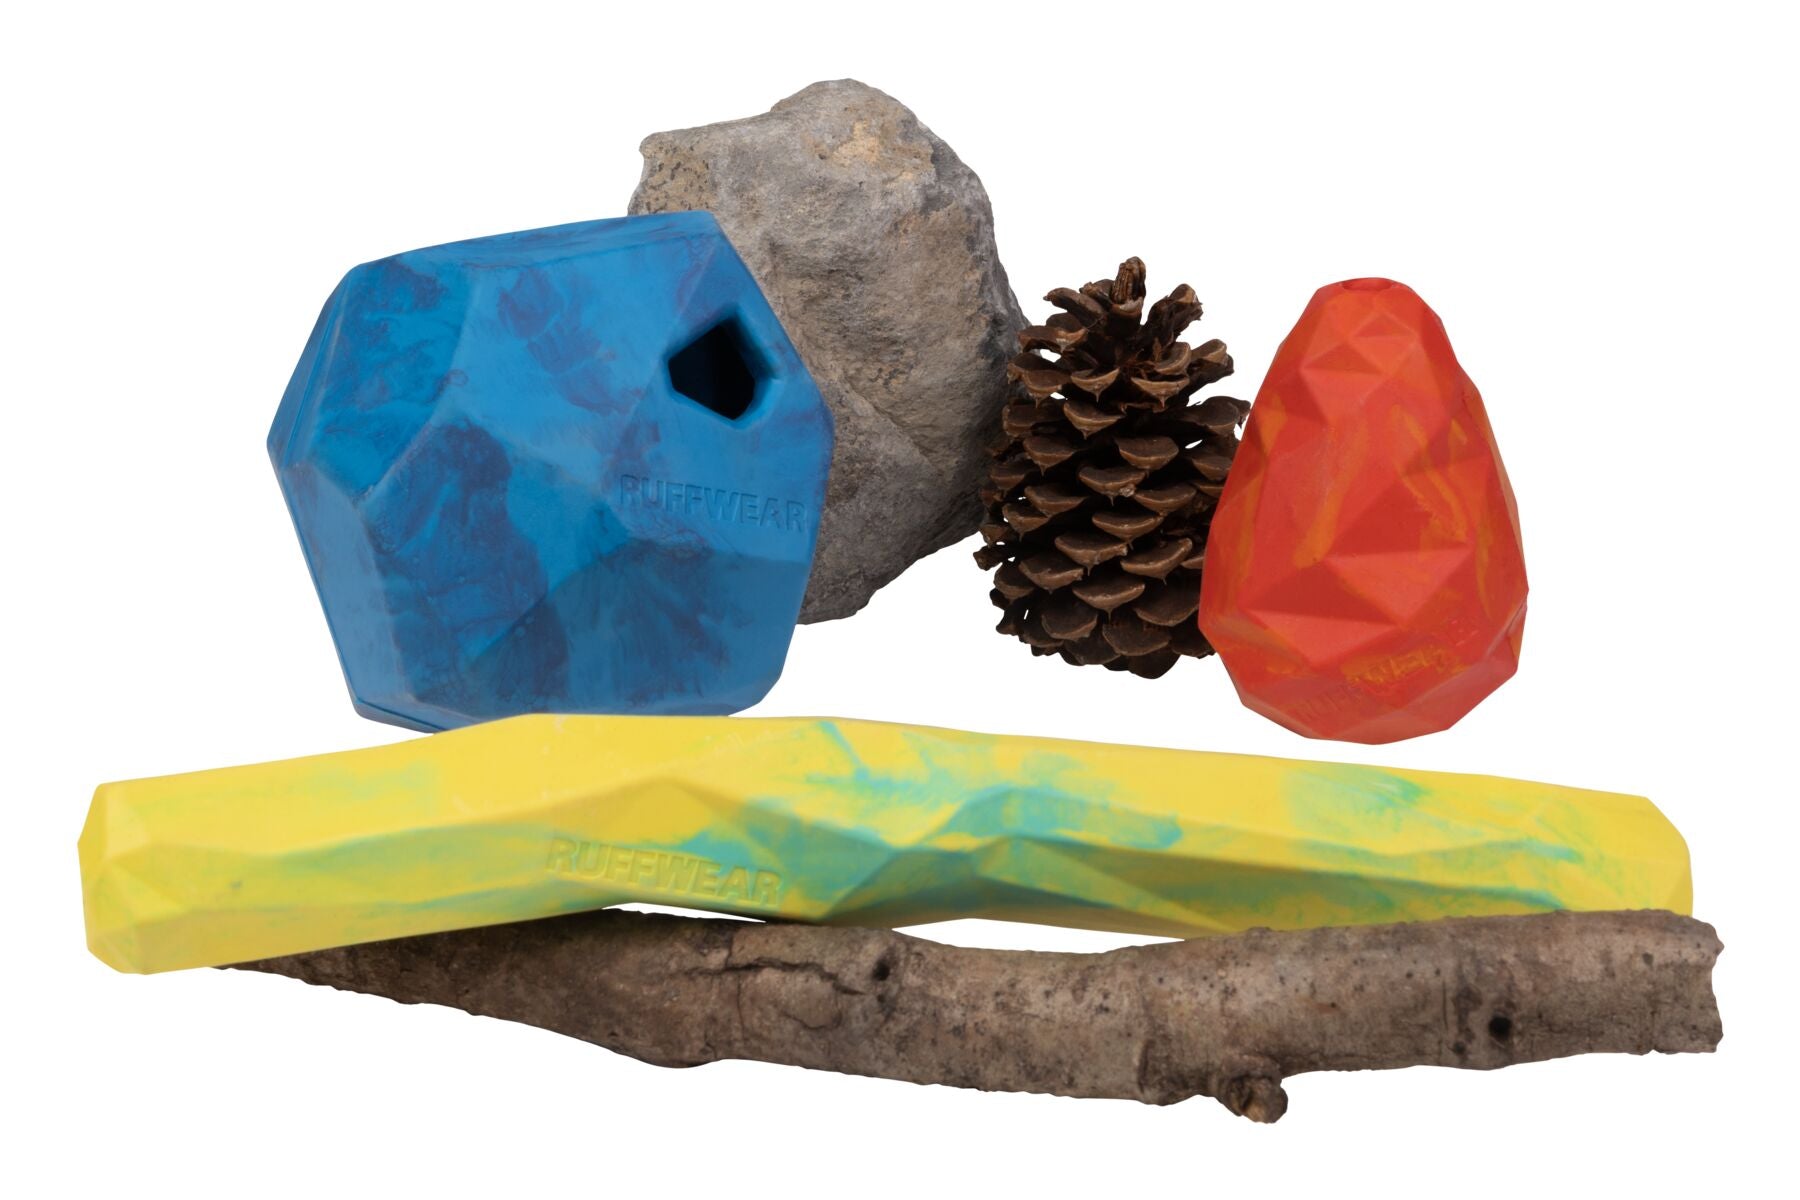 Picture of 3 Gnawt-a-toys next to a rock, a stick, and a pinecone. 